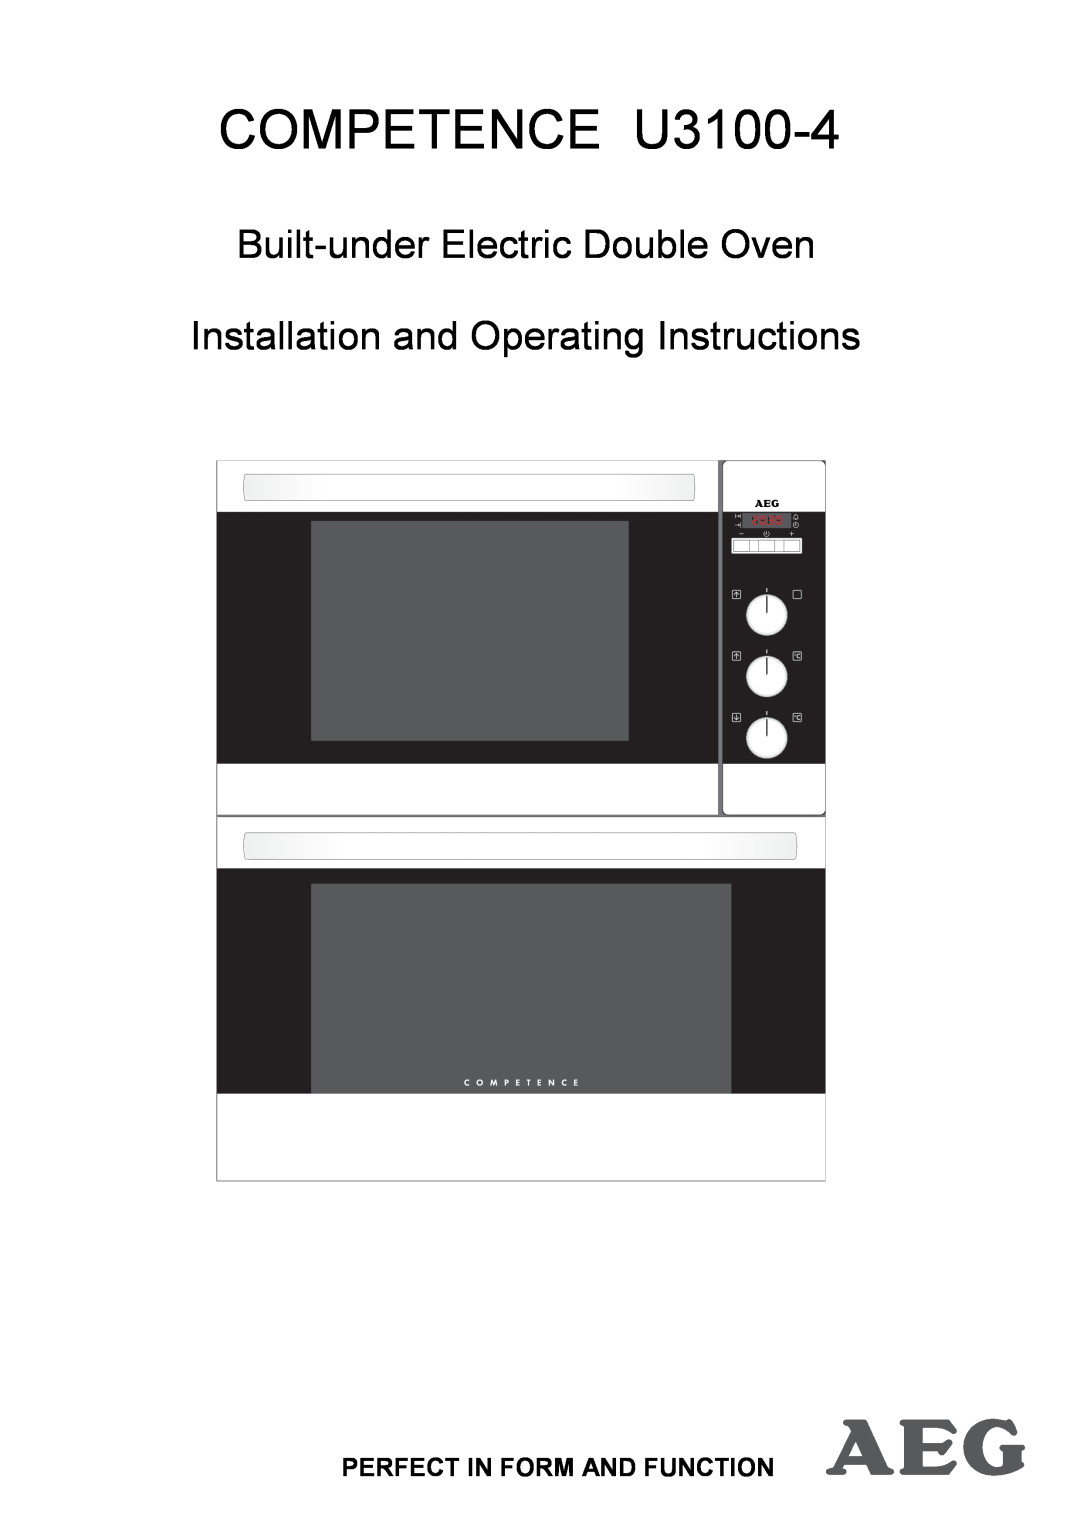 AEG manual Perfect In Form And Function, COMPETENCE U3100-4, Built-under Electric Double Oven 